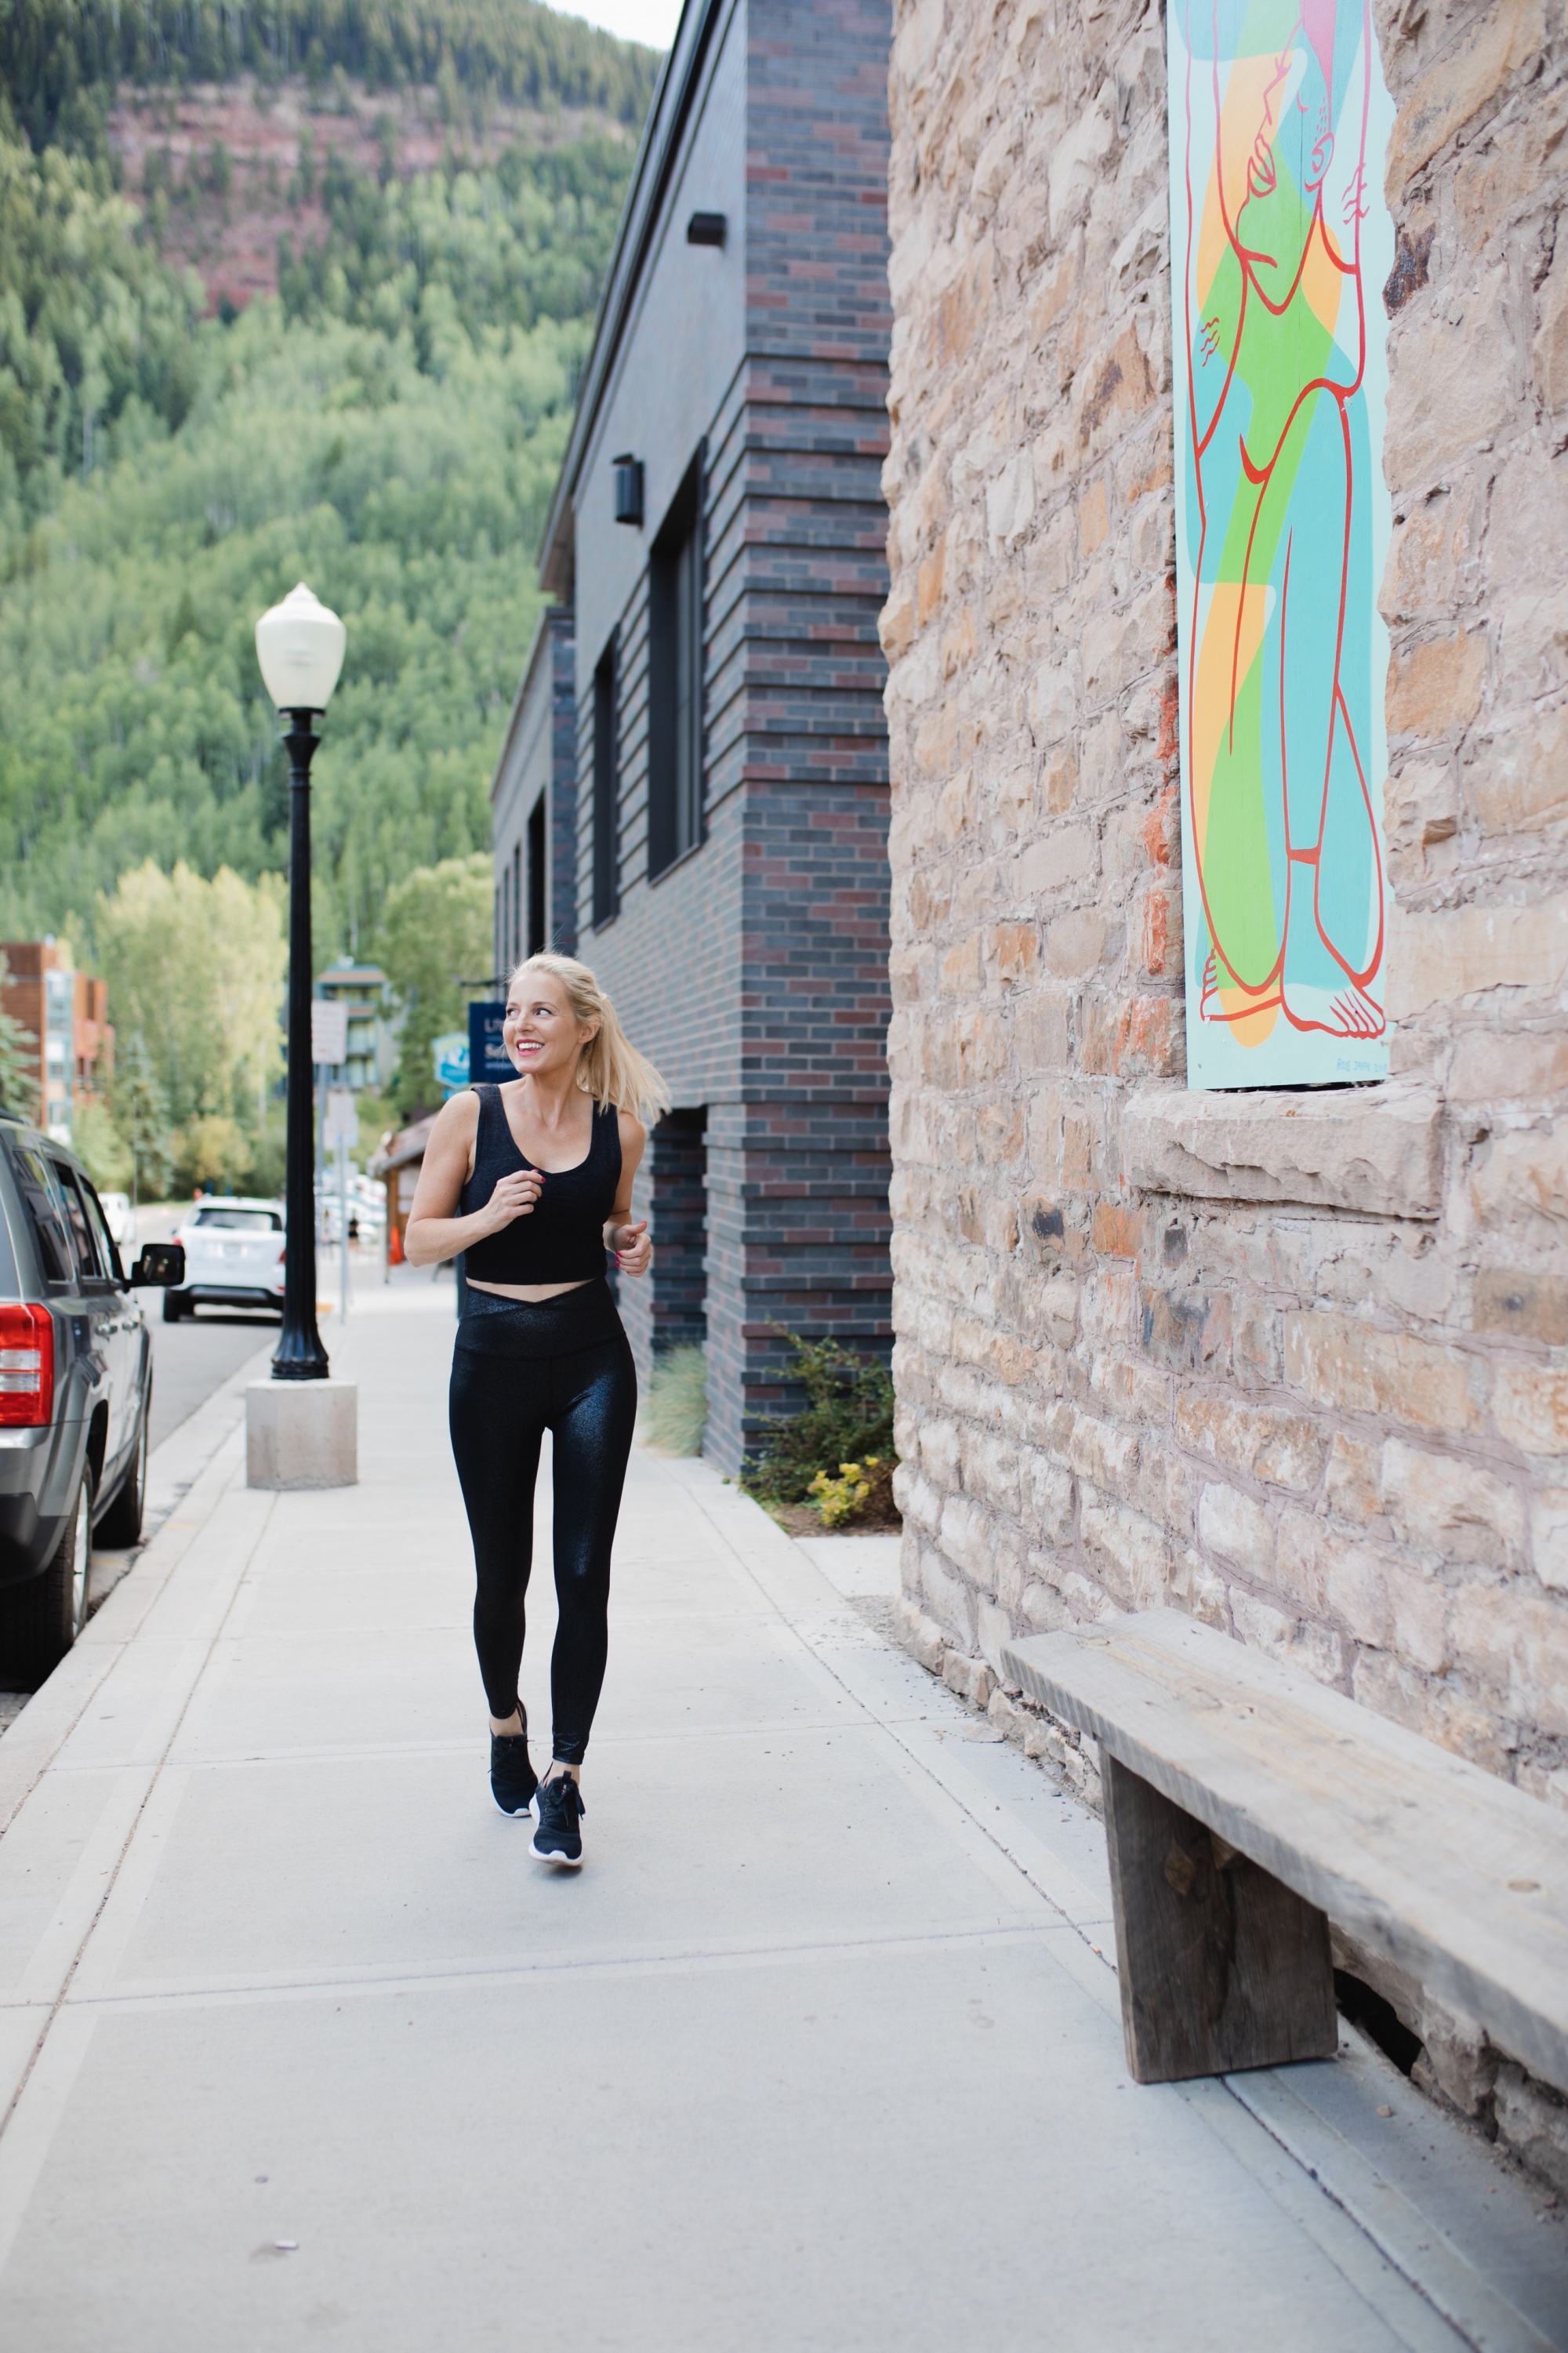 Nordstrom Sale Activewear, Fashion blogger Erin Busbee of Busbee Style wearing Beyond Yoga leggings, black Zella sports bra, and adidas sneakers from the Nordstrom Anniversary Sale in Telluride, Colorado